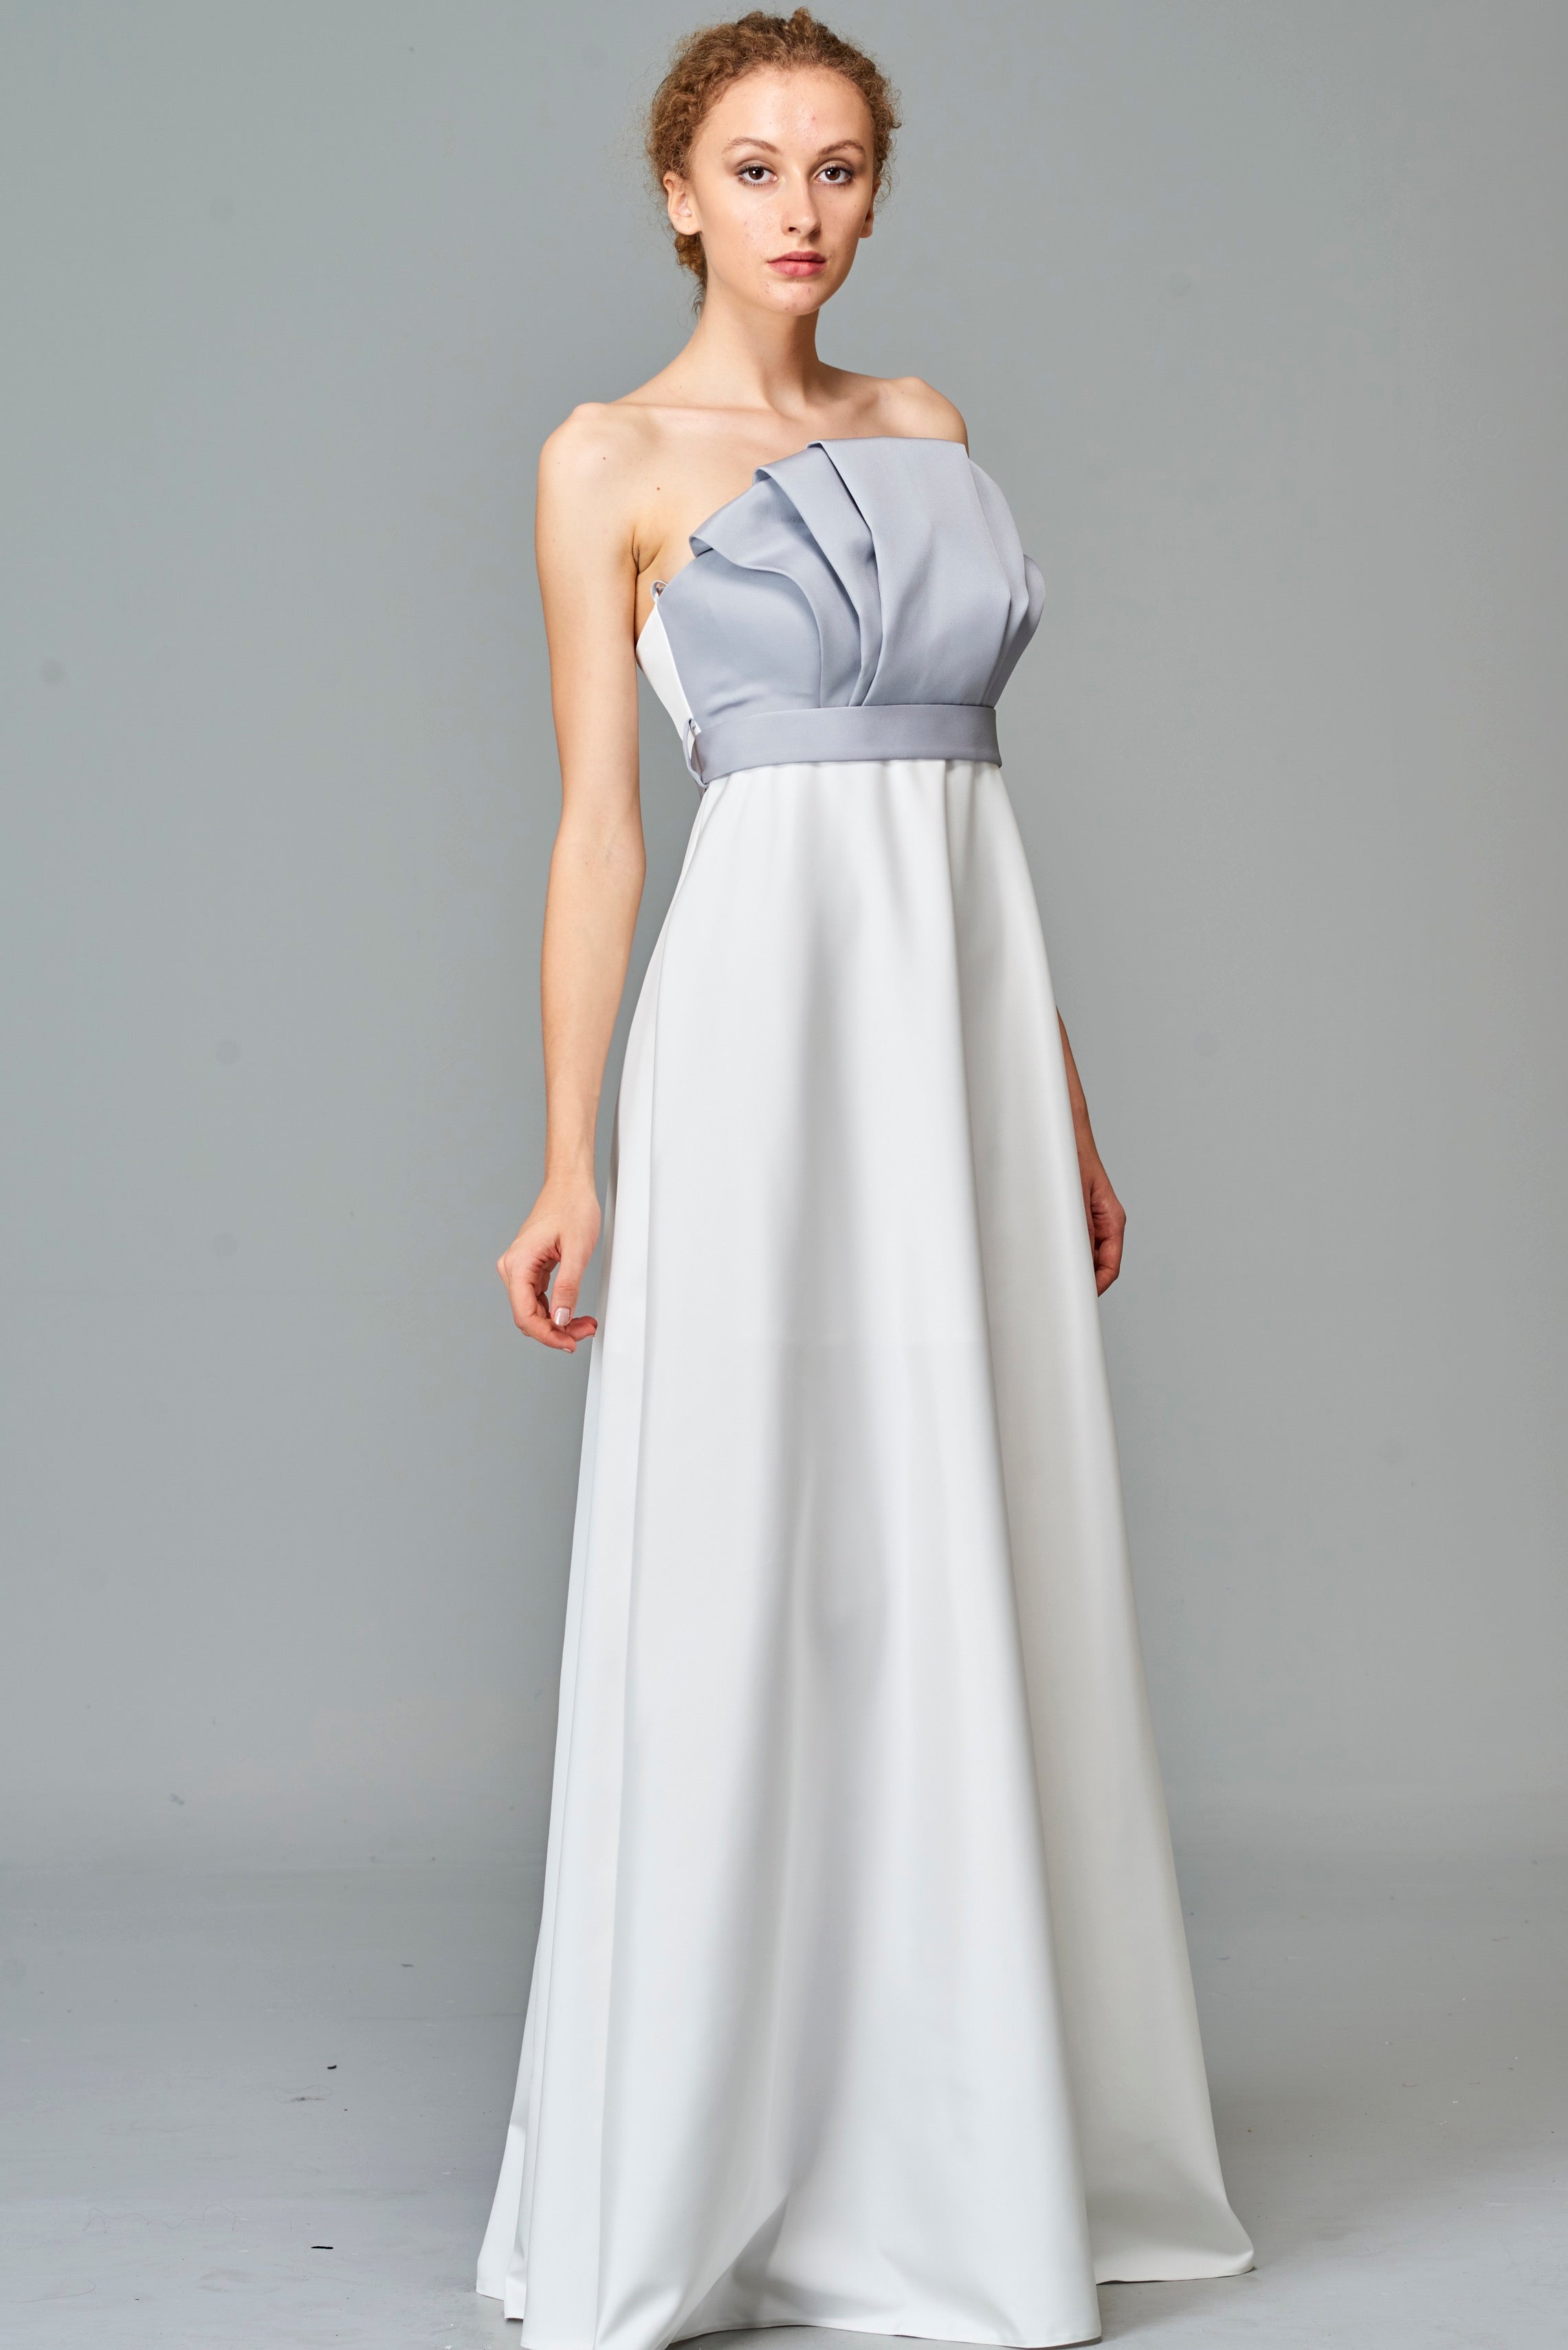 Two-Toned Empire Gown